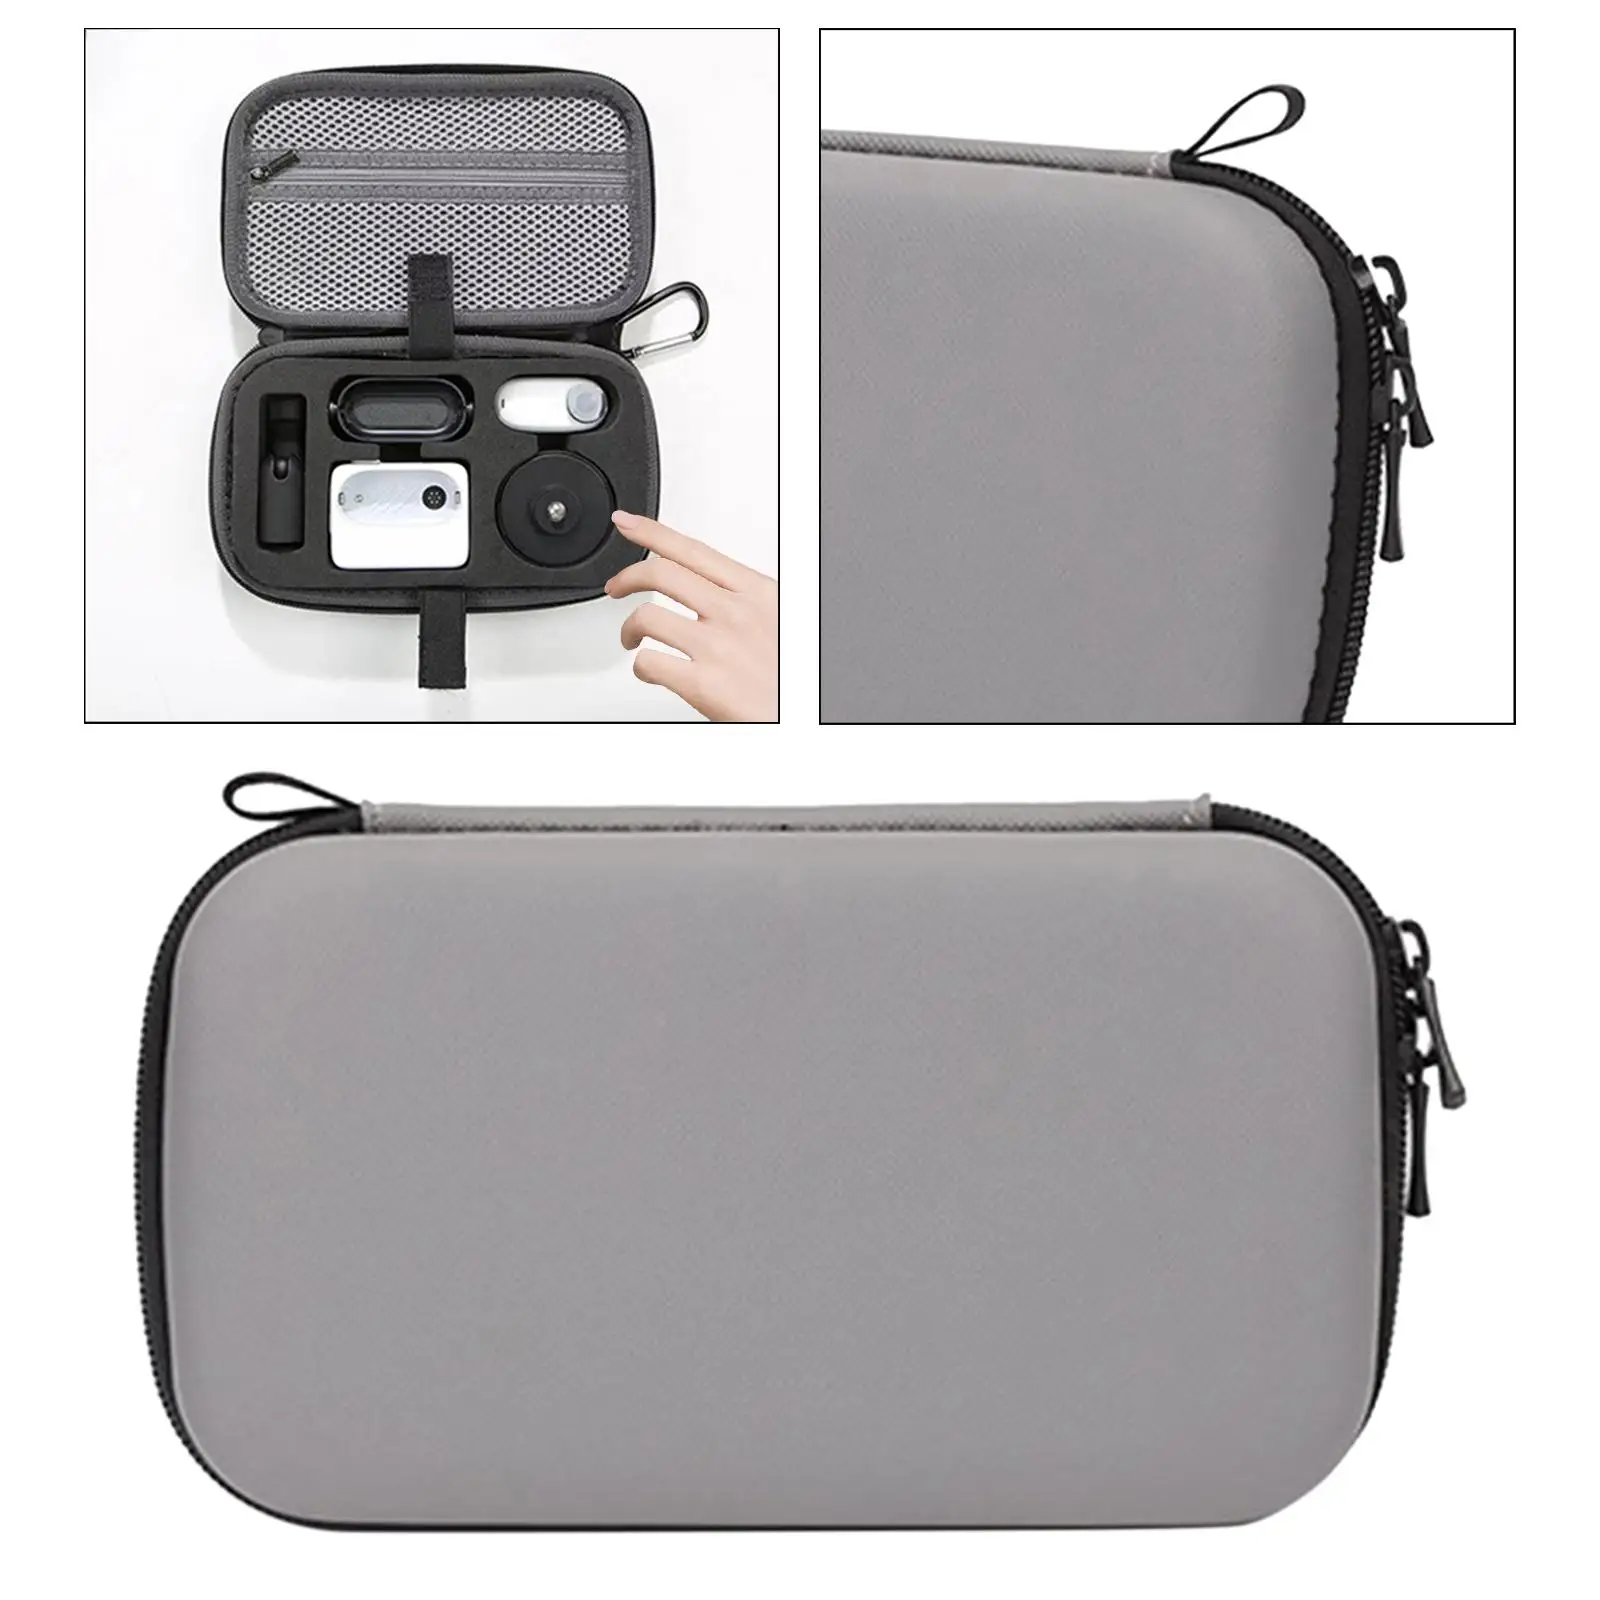 Action Camera Bag Protective Portable Waterproof Handbag Soft Padded Durable Travel Case Camera Insert Bag for Go 3 Accessories